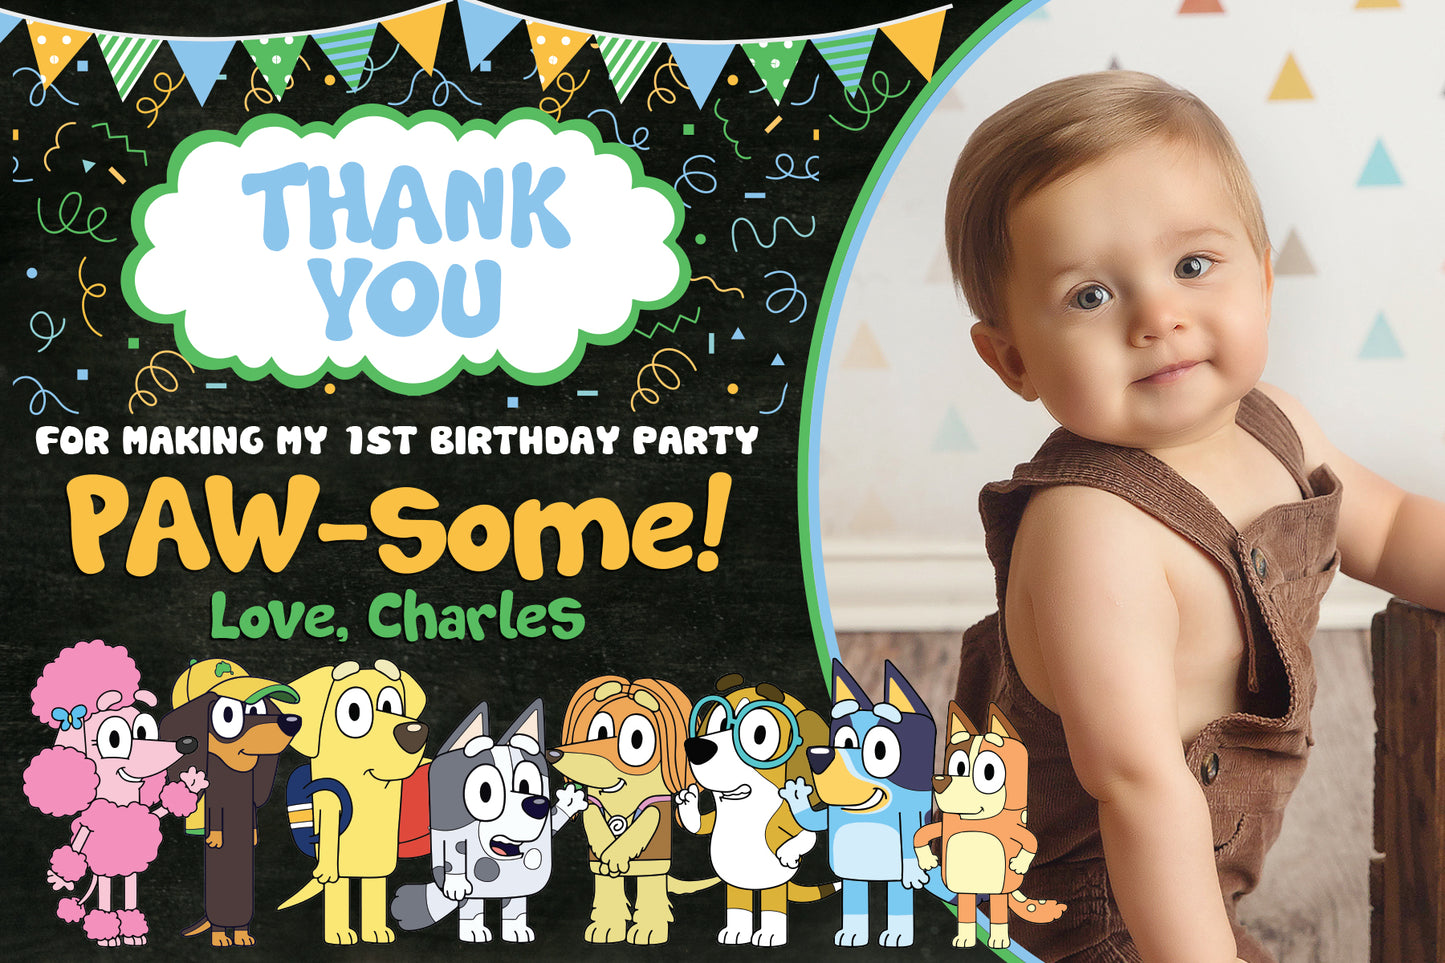 BLUEY Thank You Card - Printed or Digital File! Bluey and Friends!